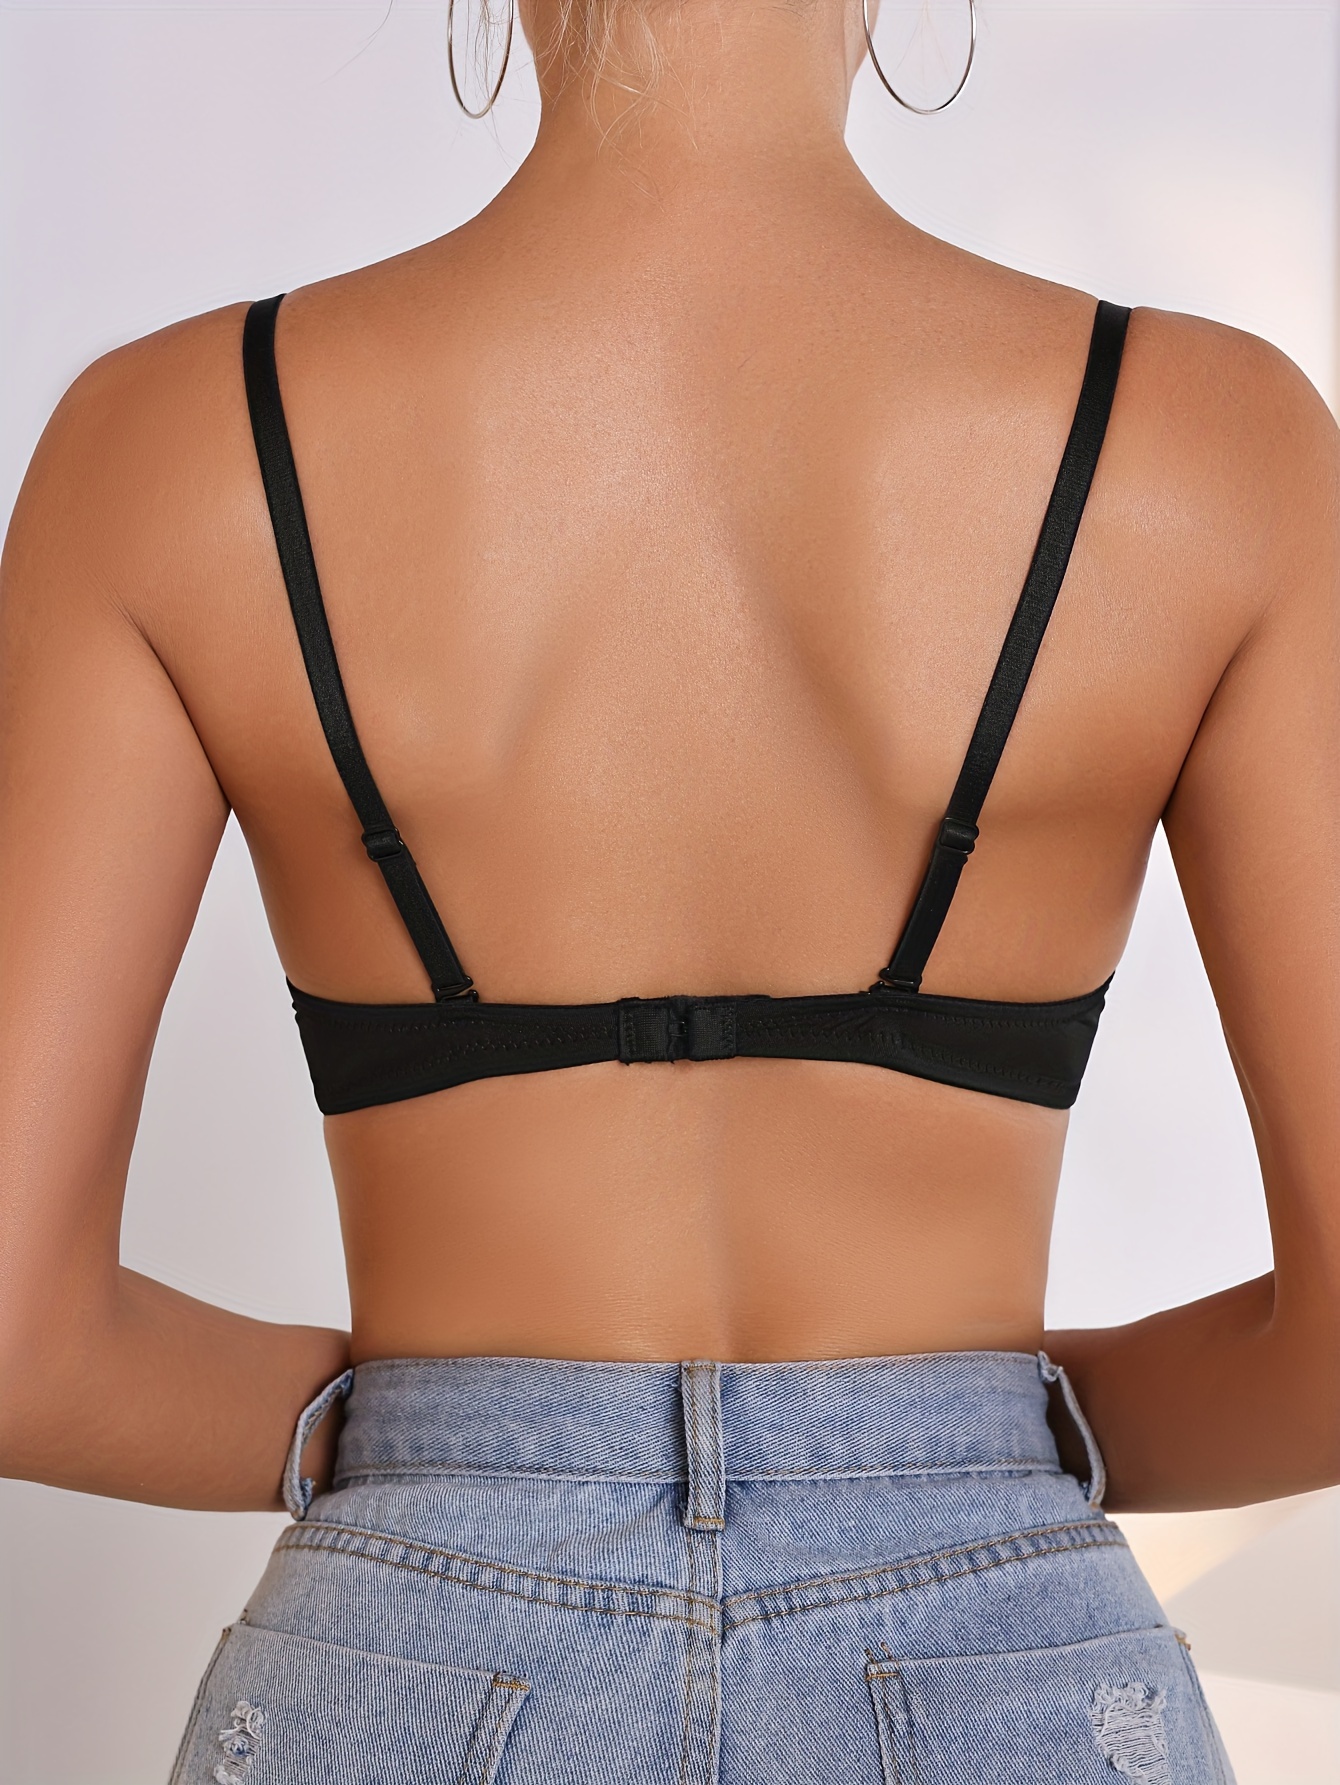 Womens Seamless Low Back Bralette With Small Chest And Soft Fabric Sexy And  Comfortable Bra Underwear For Paddles And Bending From Omeny, $15.19